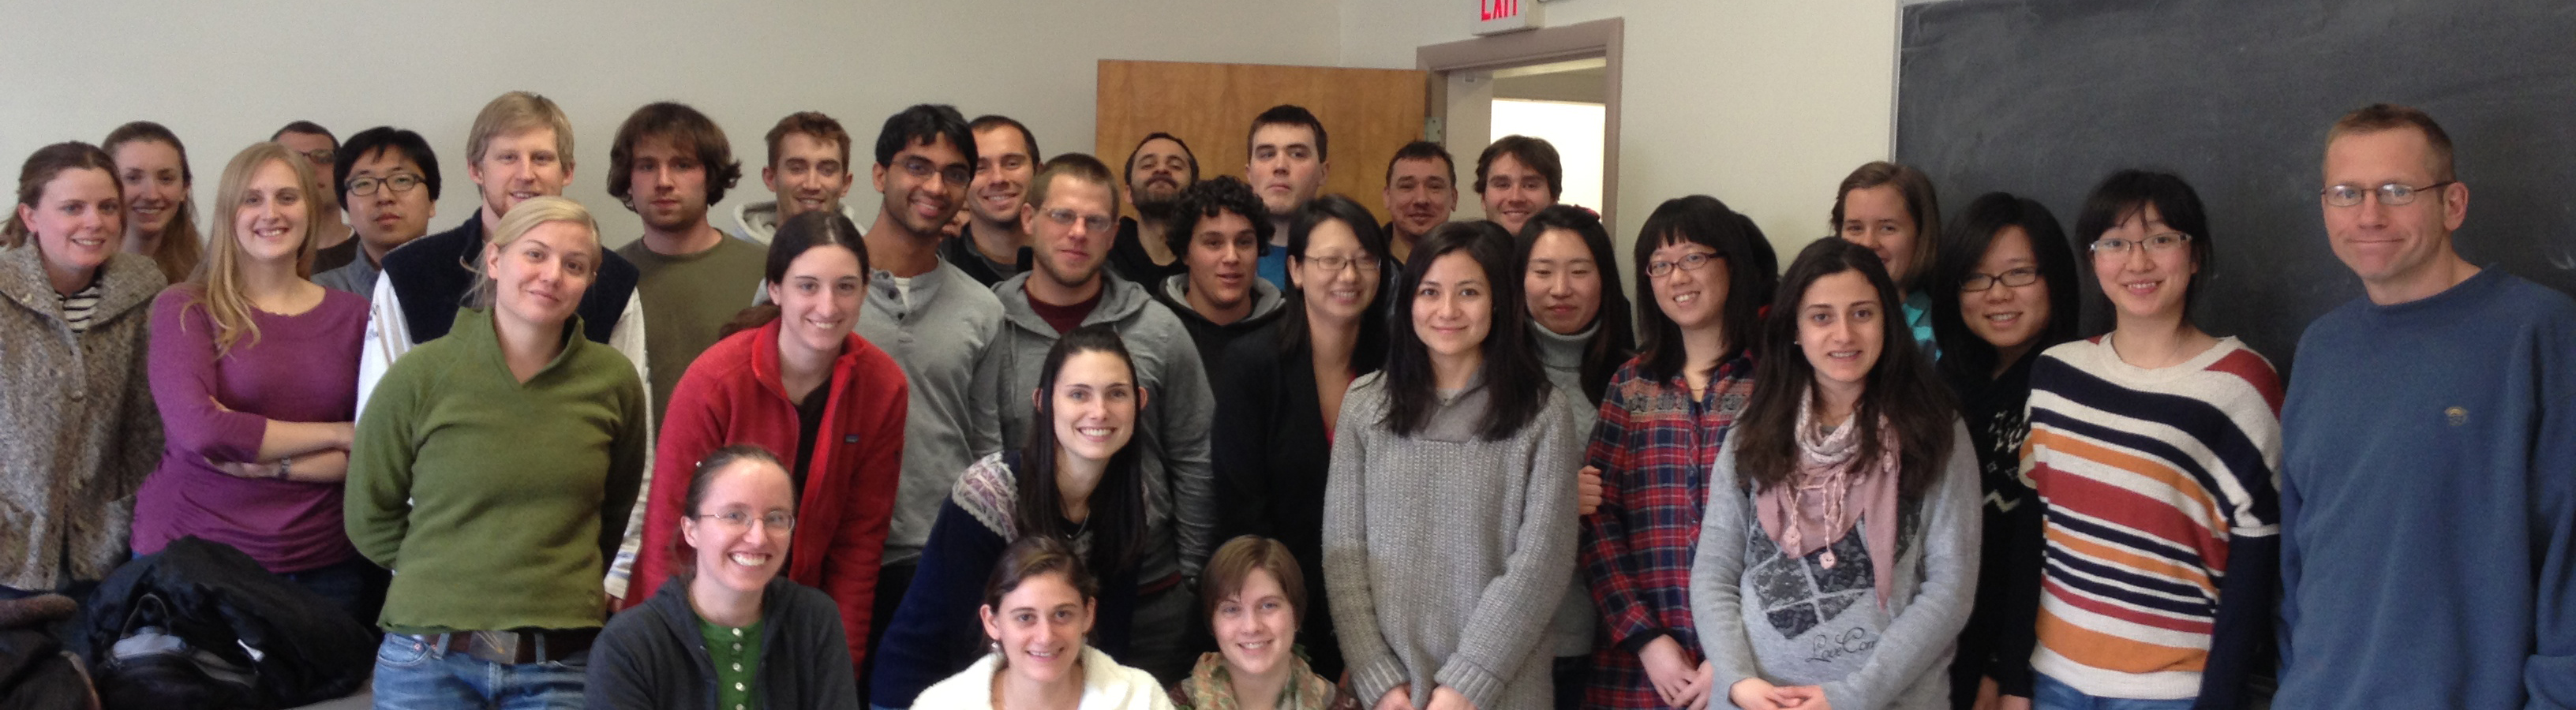 spring 2013 students